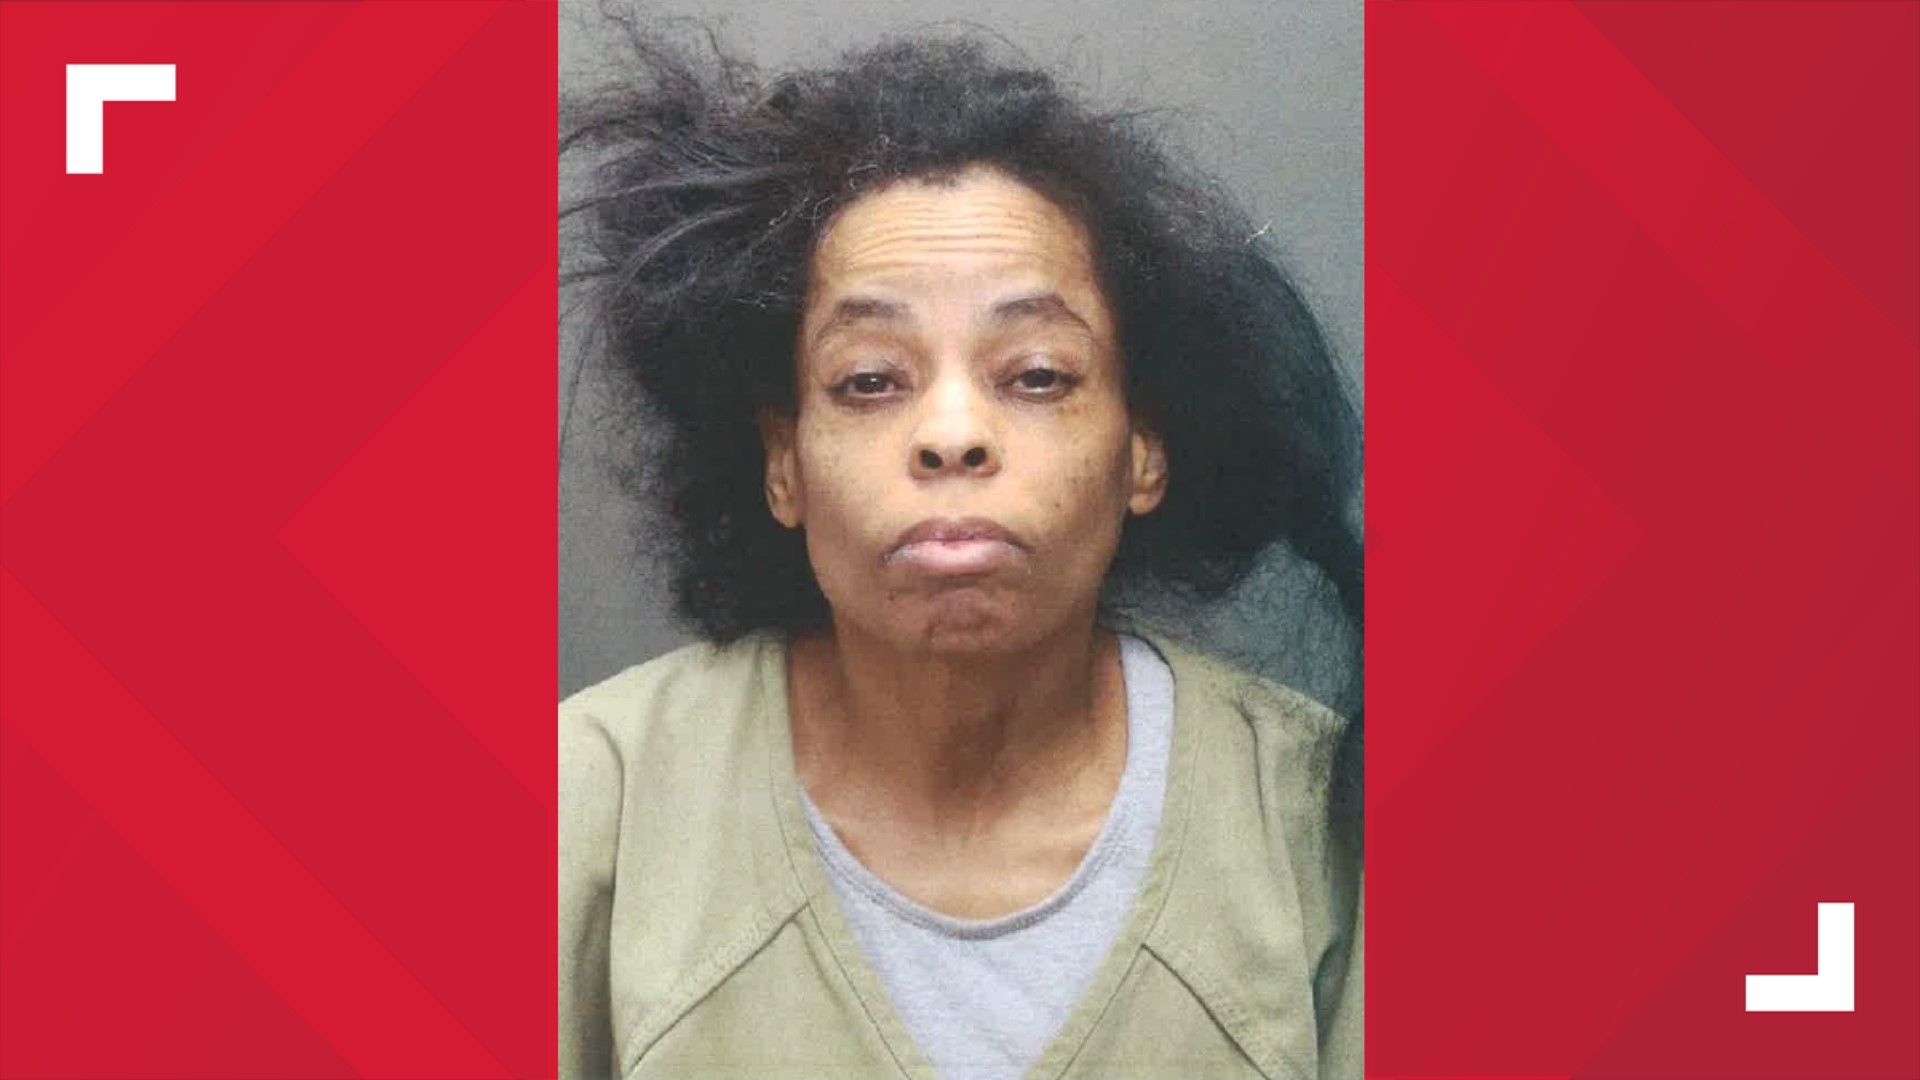 Pammy Maye was indicted on charges of aggravated murder, abuse of a corpse and tampering with evidence related to the death of Darnell Taylor.